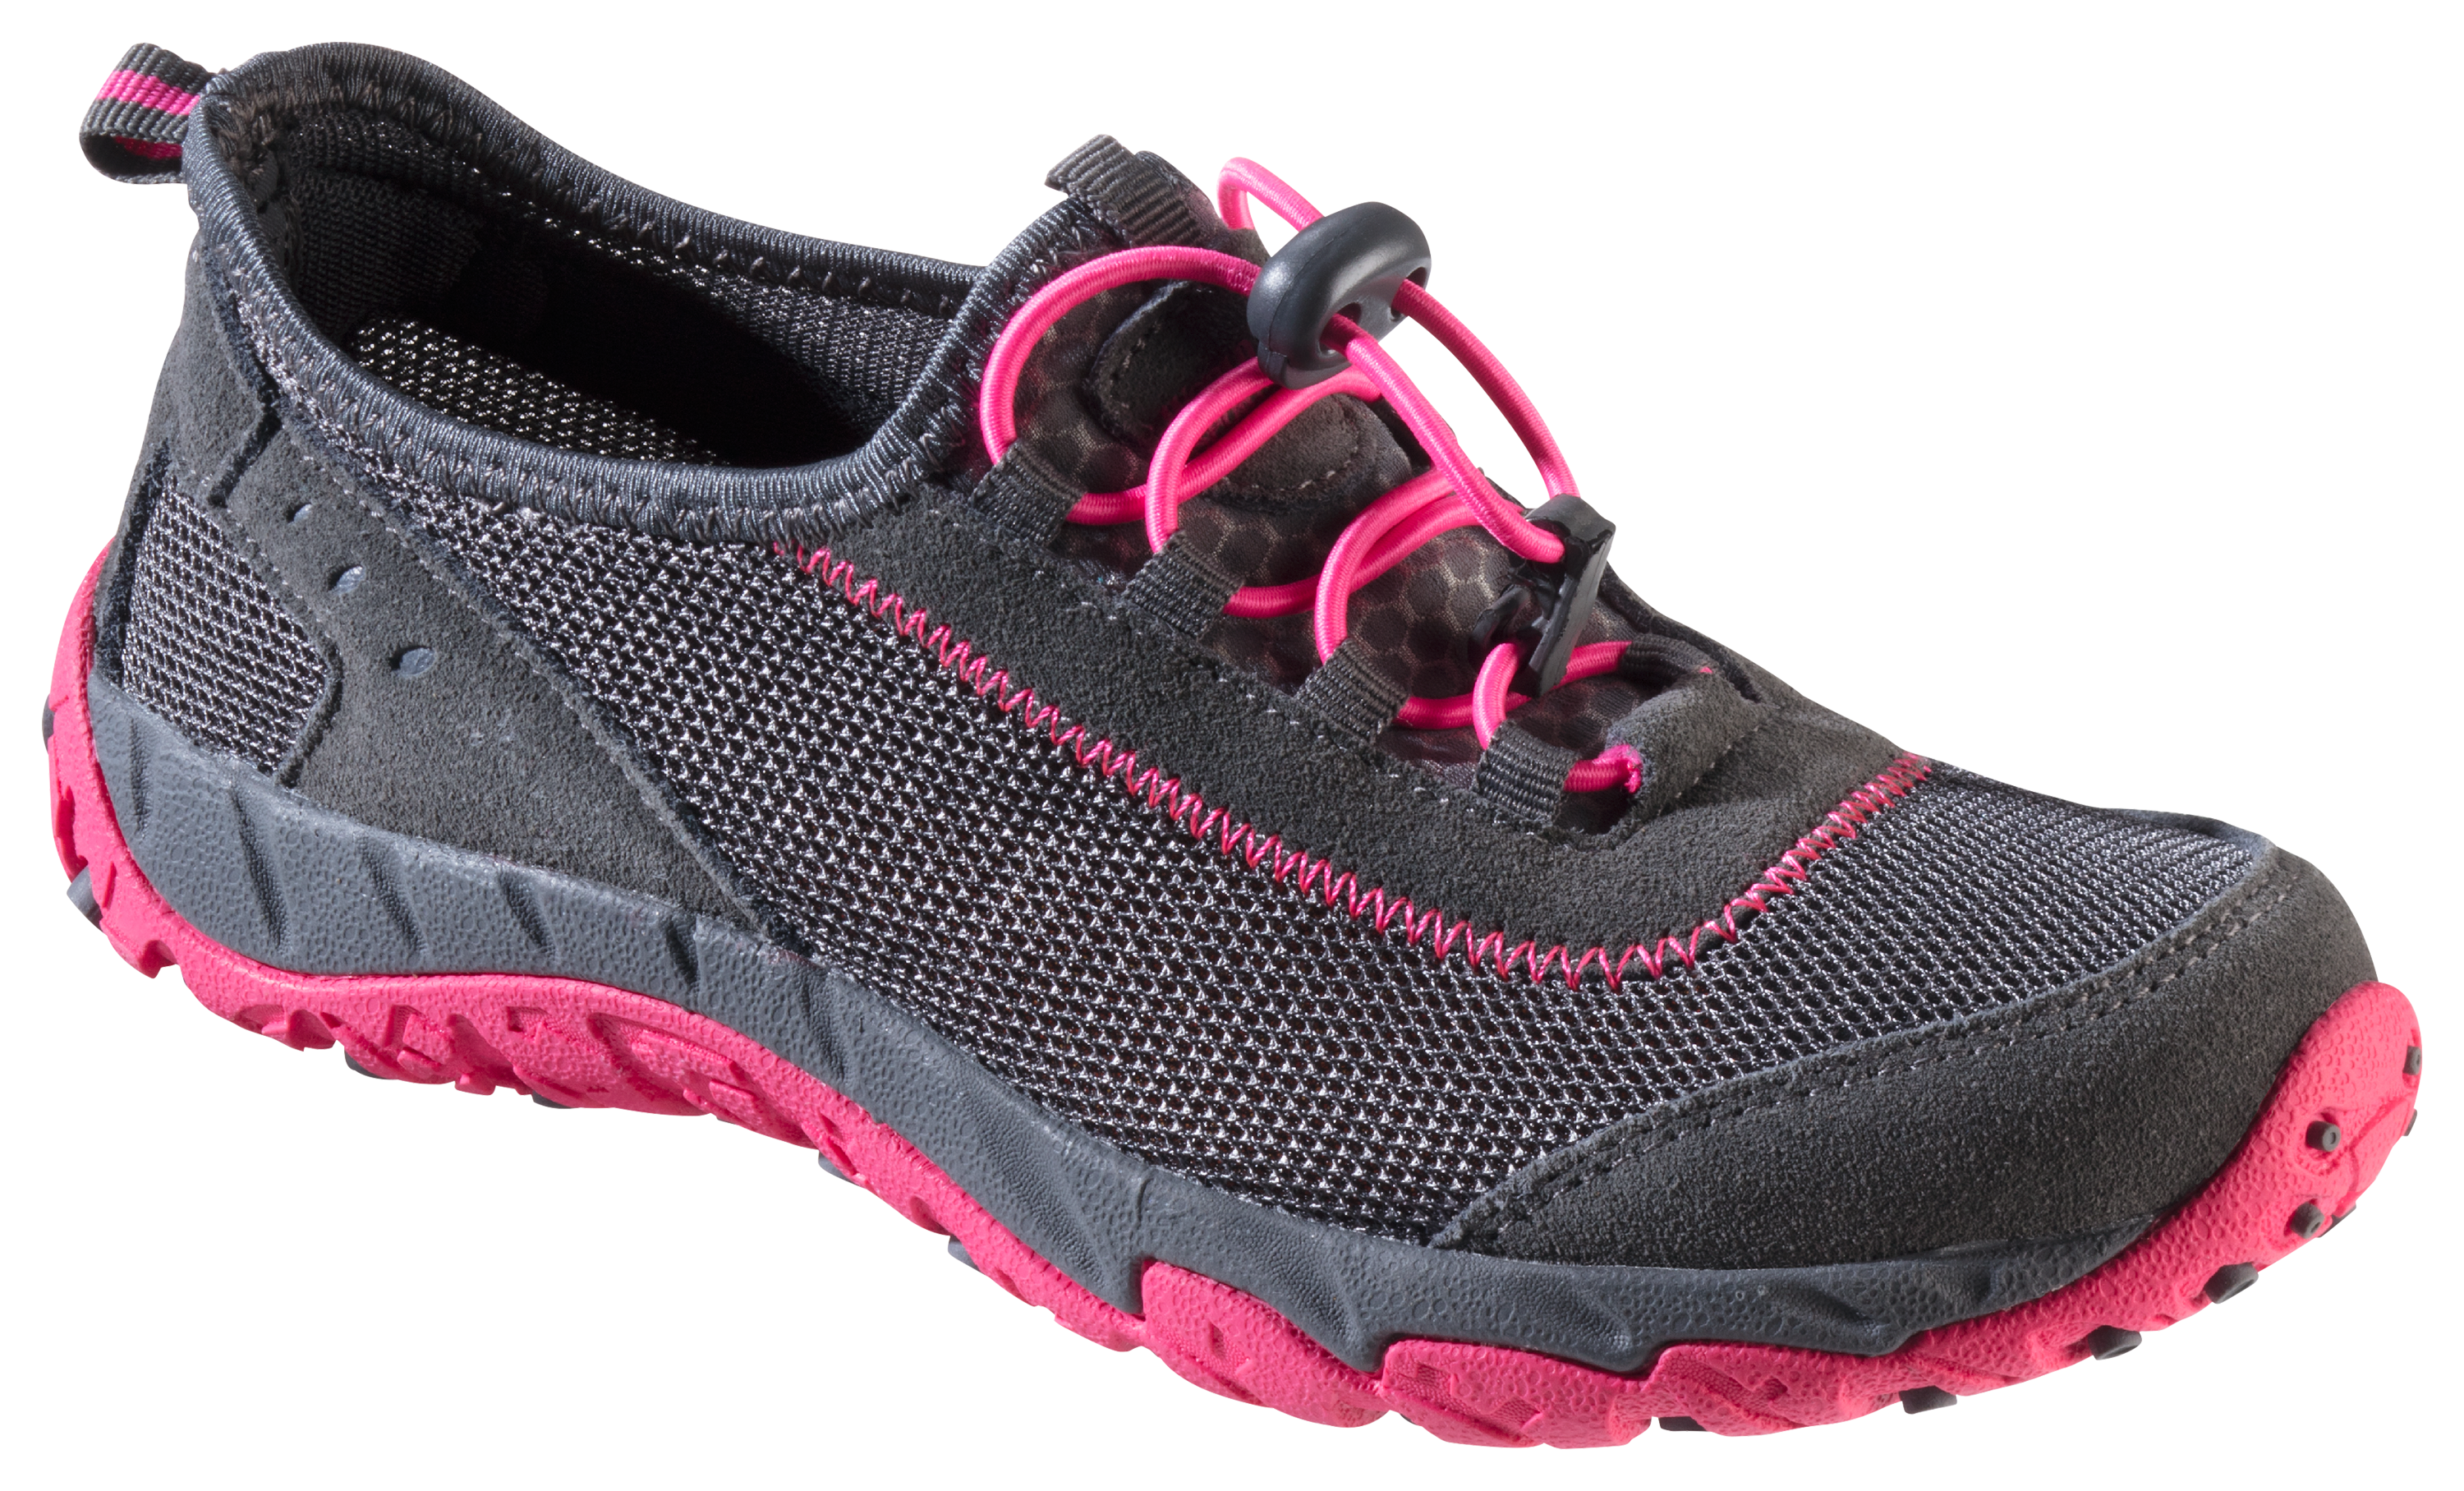 World Wide Sportsman Clear Creek Water Shoes for Ladies - Grey/Pink - 9 M